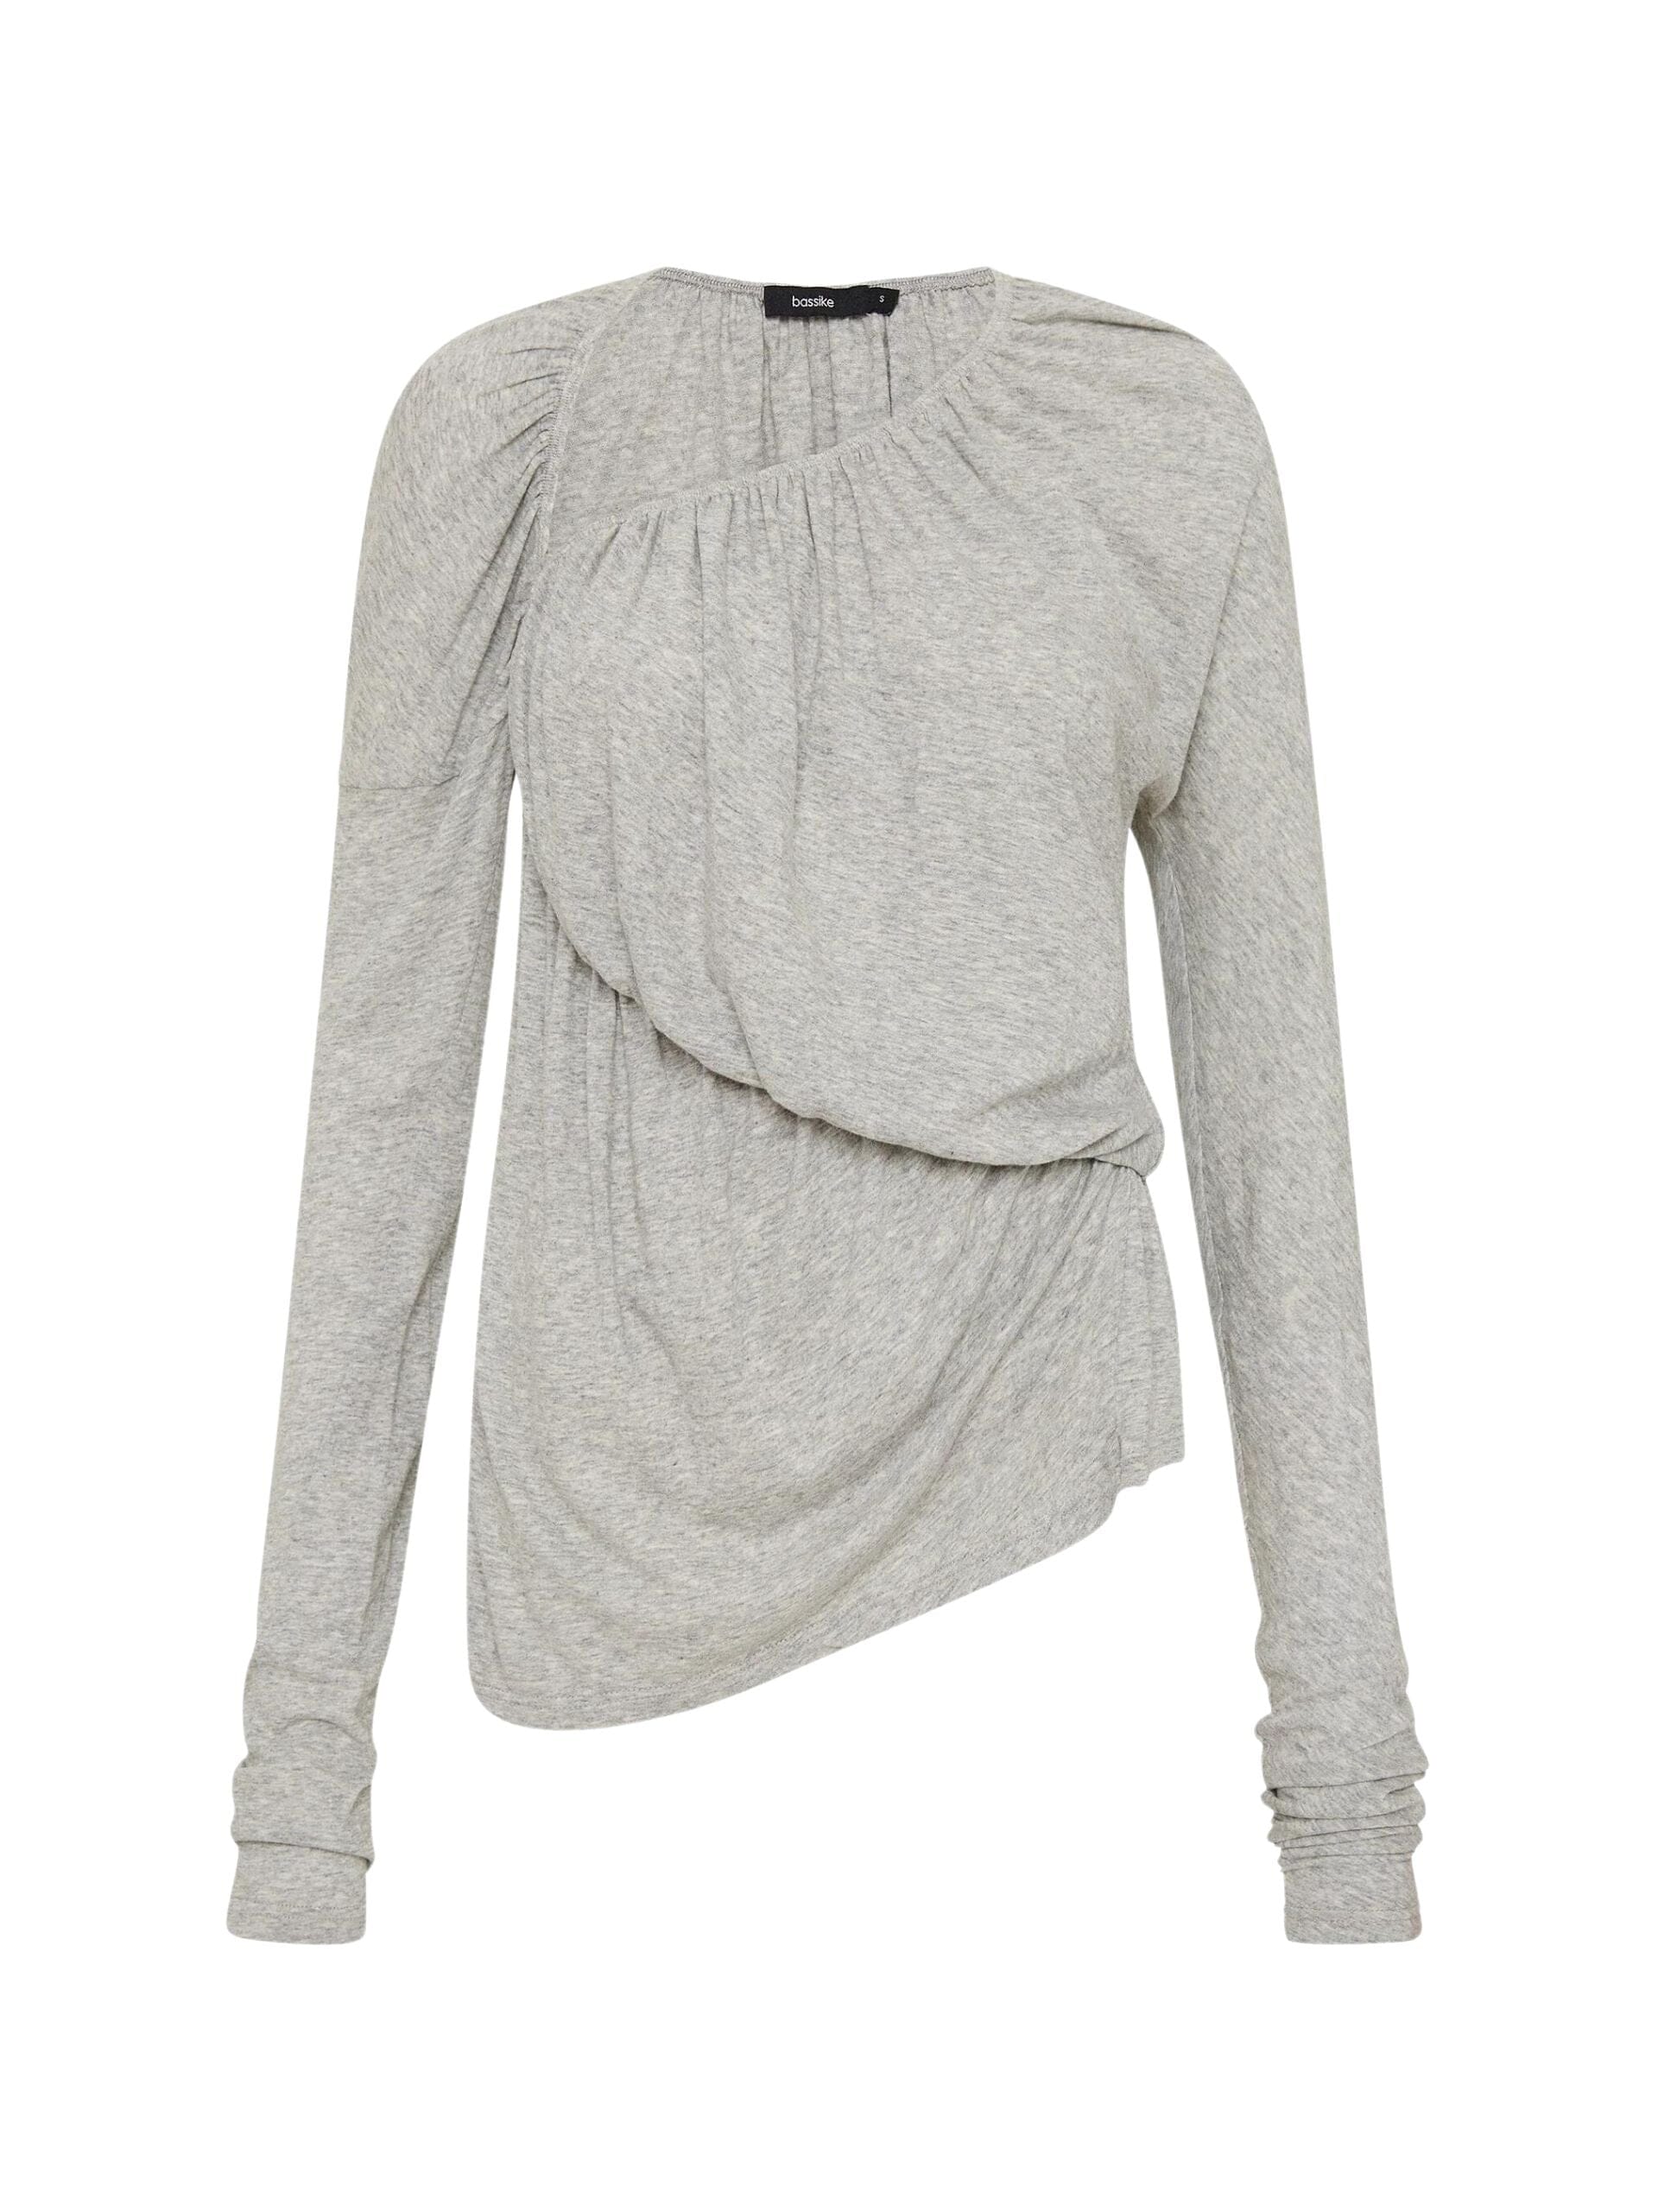 Superfine Jersey Ruched Top / Grey Marl Womens Bassike 